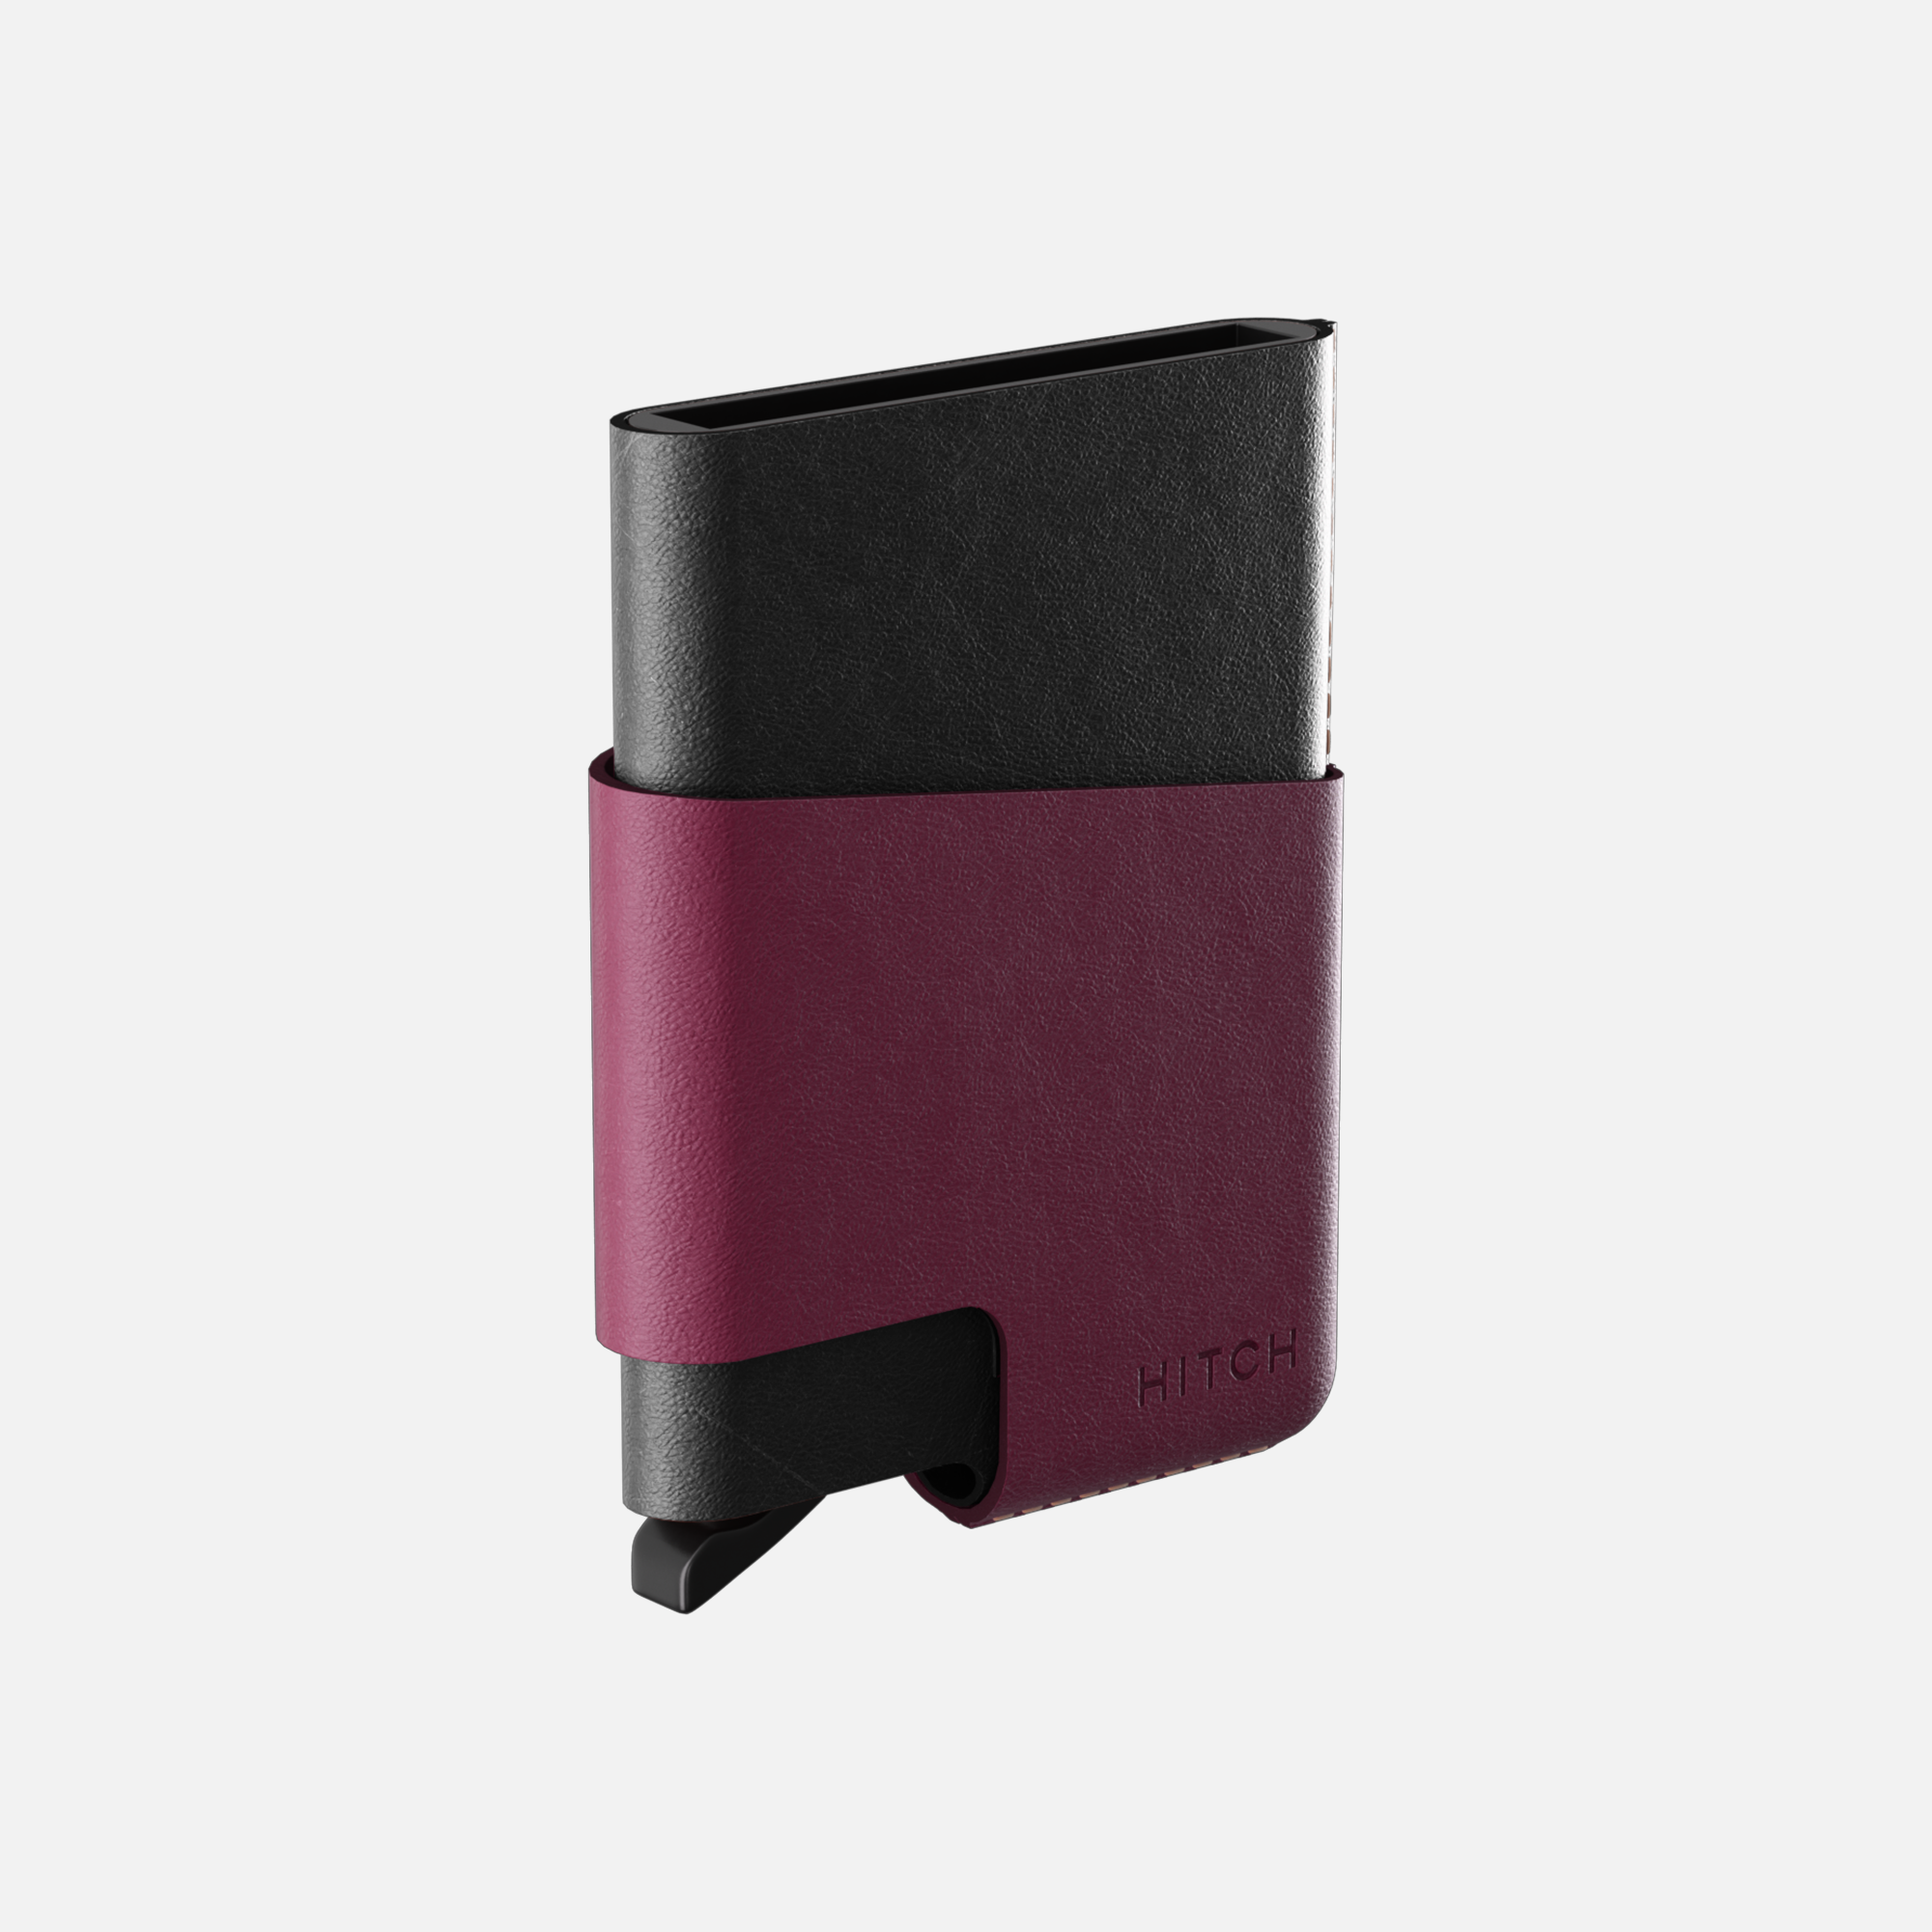 Black and burgundy Hitch wallet displayed on a white background.